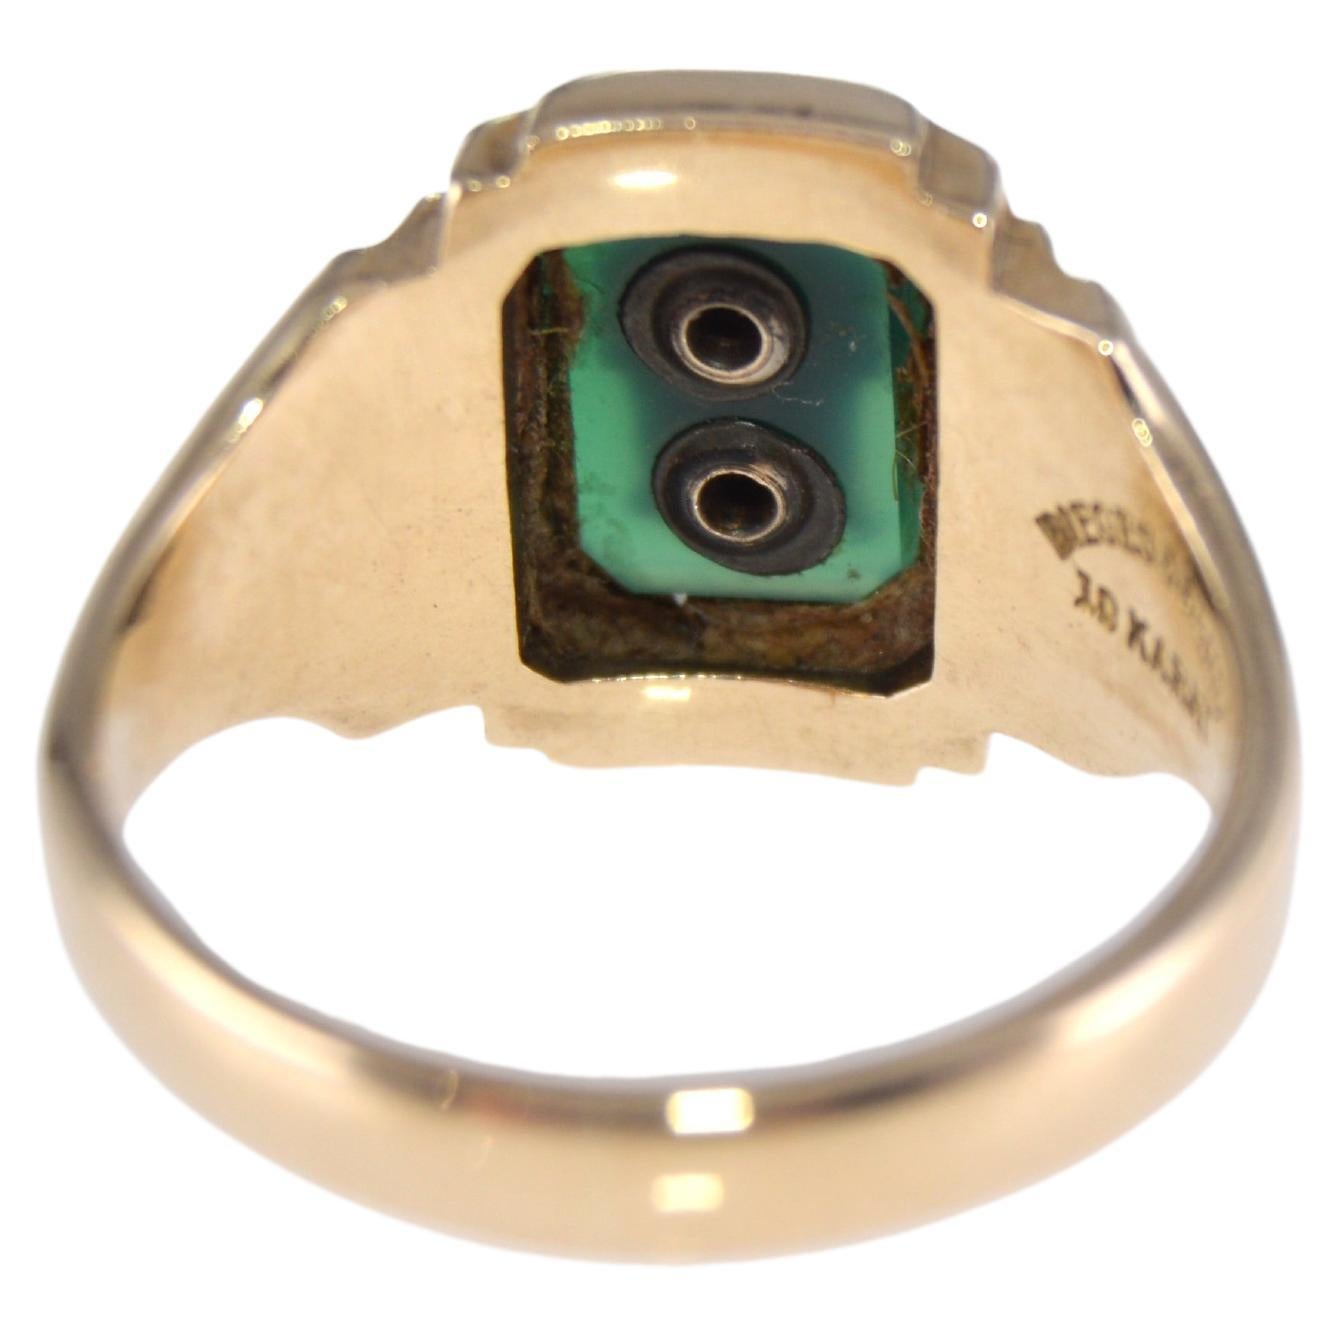 Unisex Art Deco Signet Ring in 10 Karat Solid Gold with Gold Inset from 1953 For Sale 7